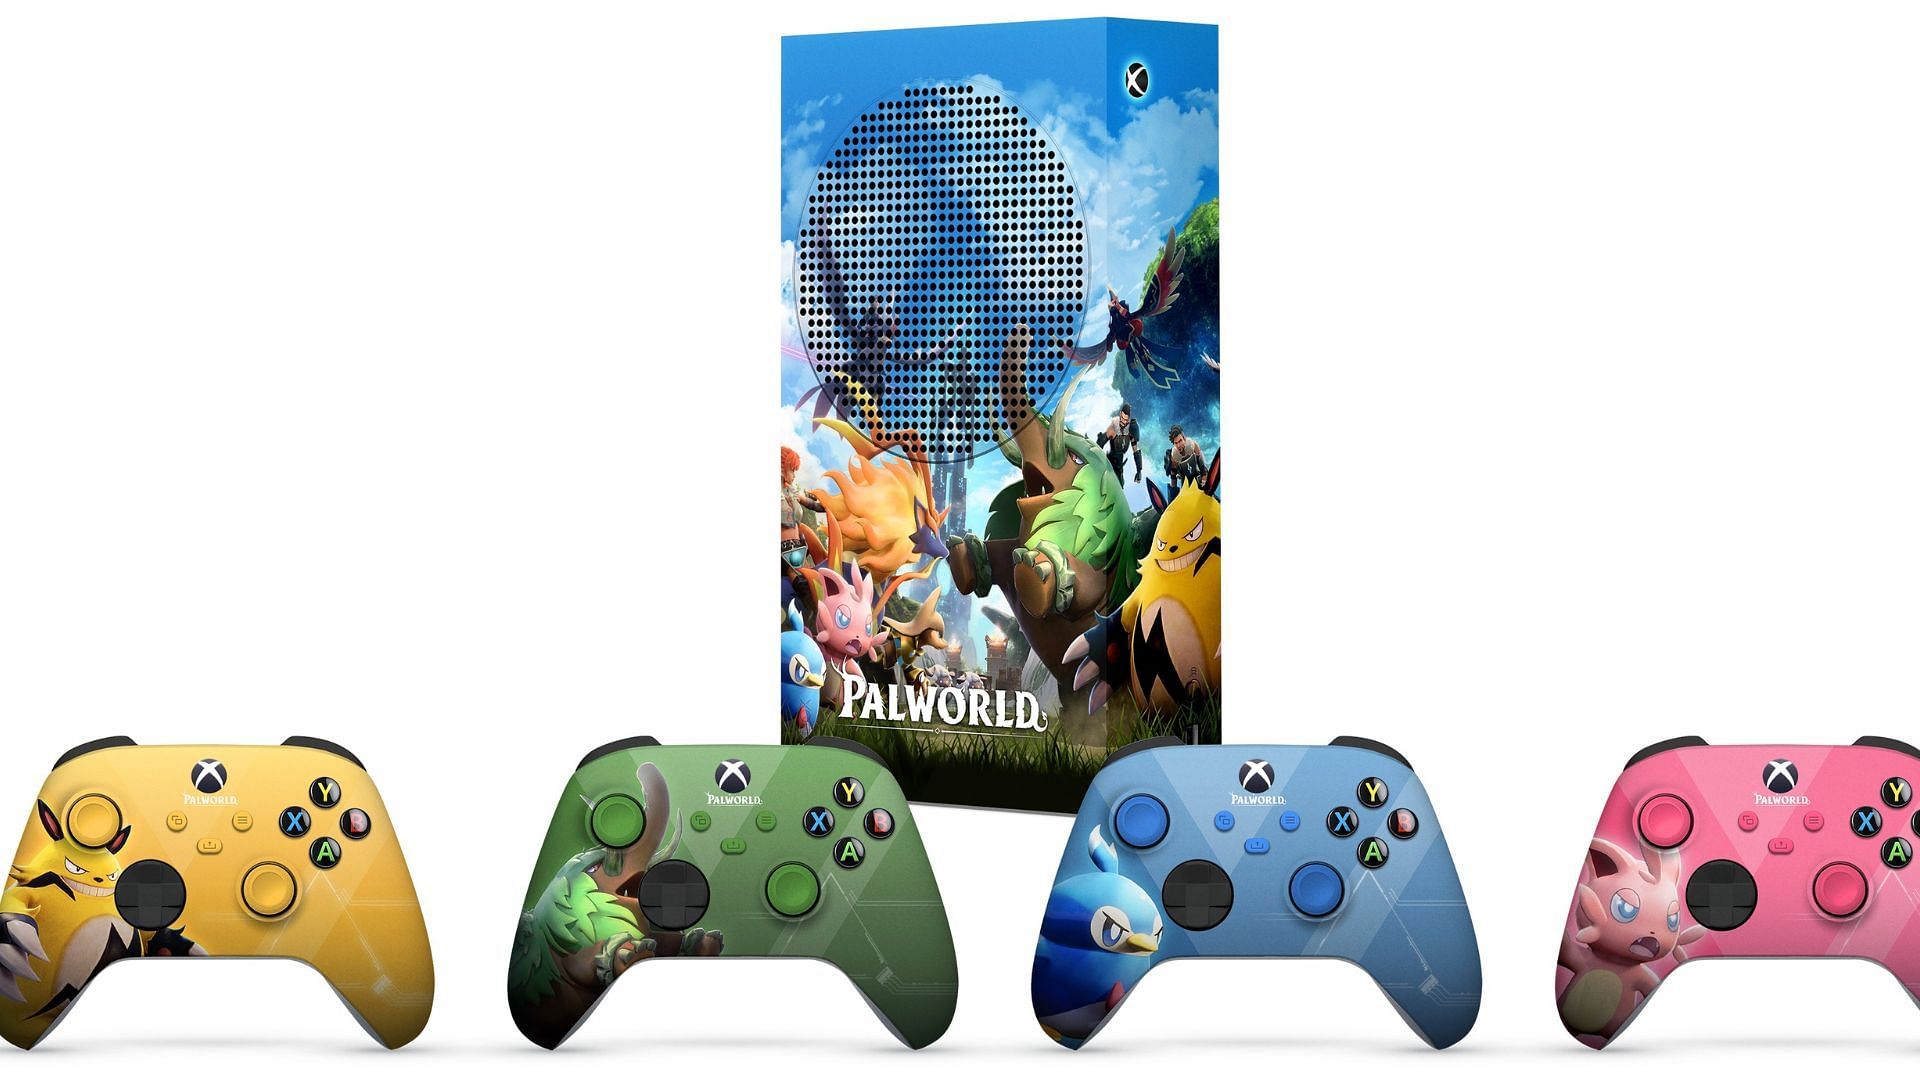 The Xbox Series S Palworld special edition console giveaway is current going on (Image via Xbox/X)